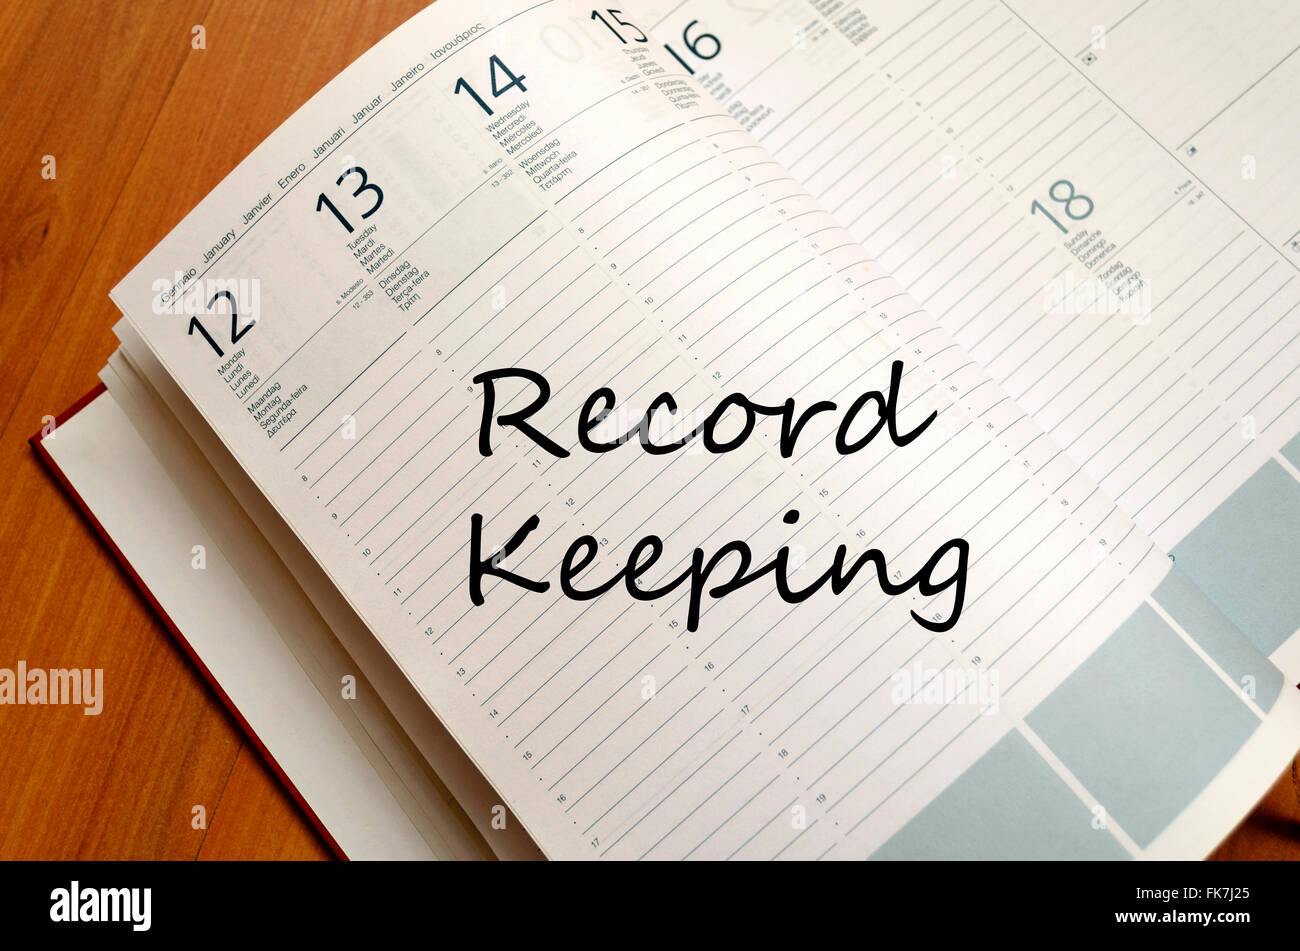 Record keeping text concept write on notebook Stock Photo